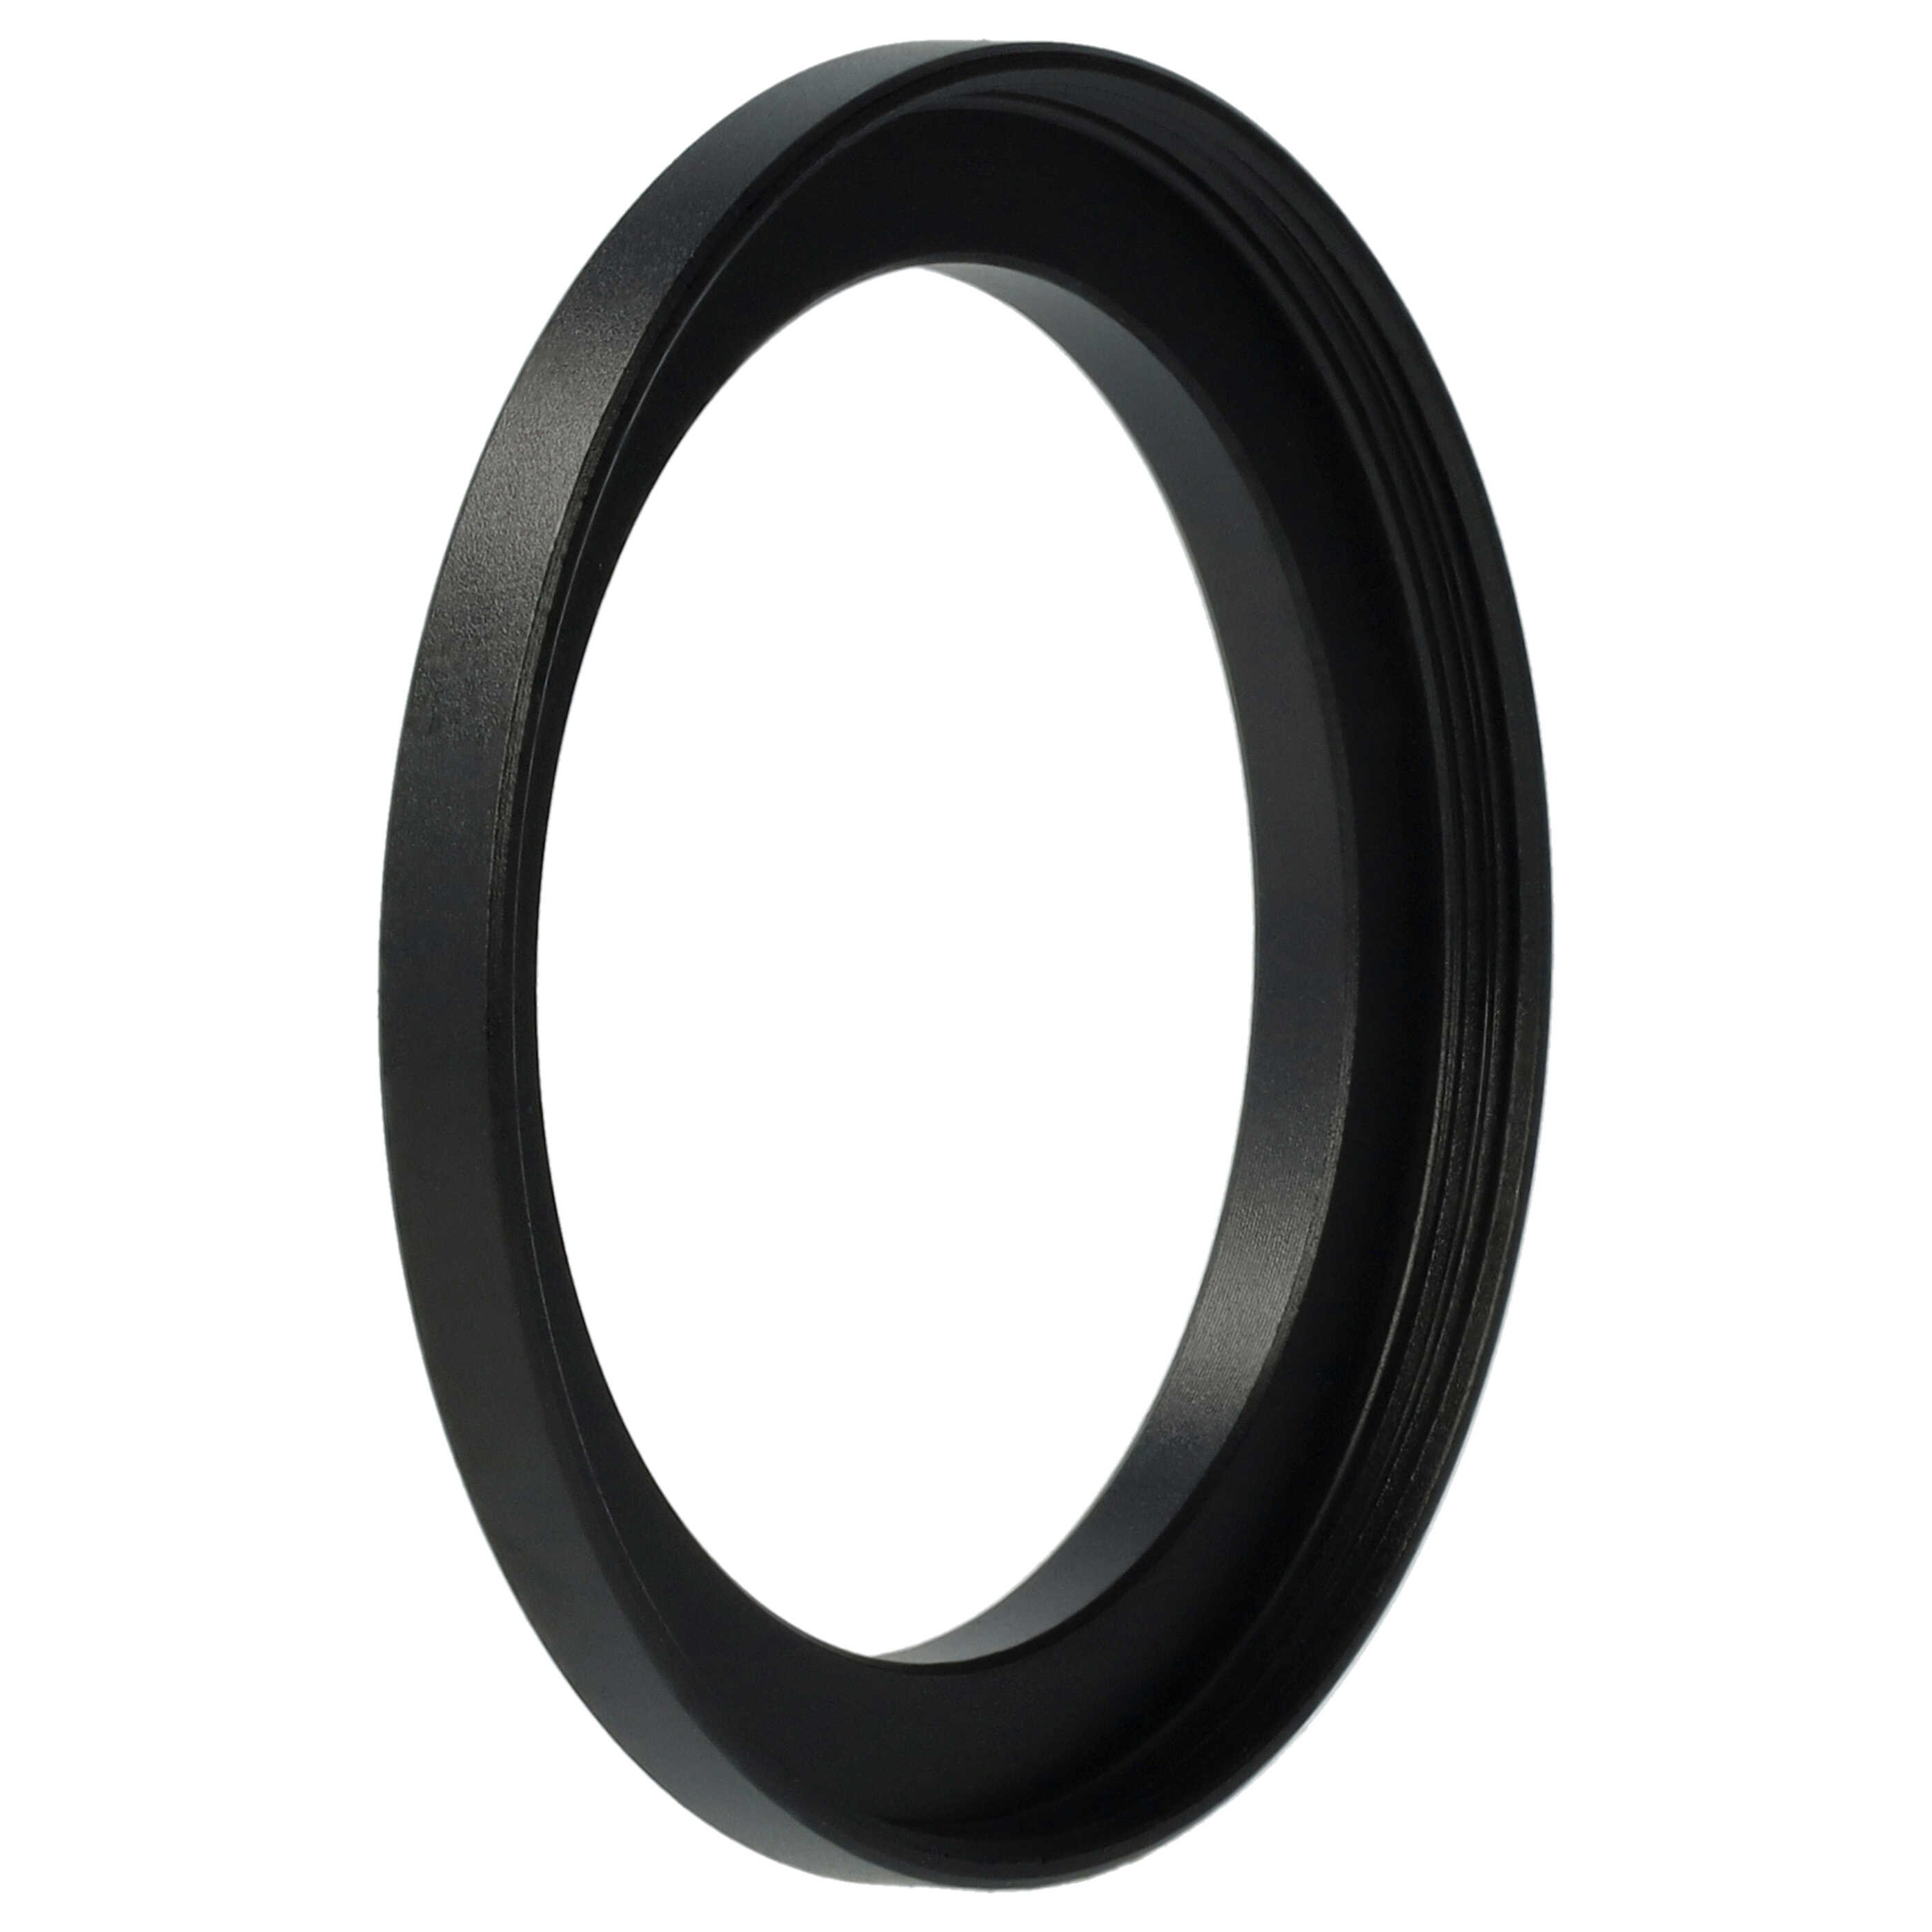 Step-Up Ring Adapter of 39 mm to 46 mmfor various Camera Lens - Filter Adapter